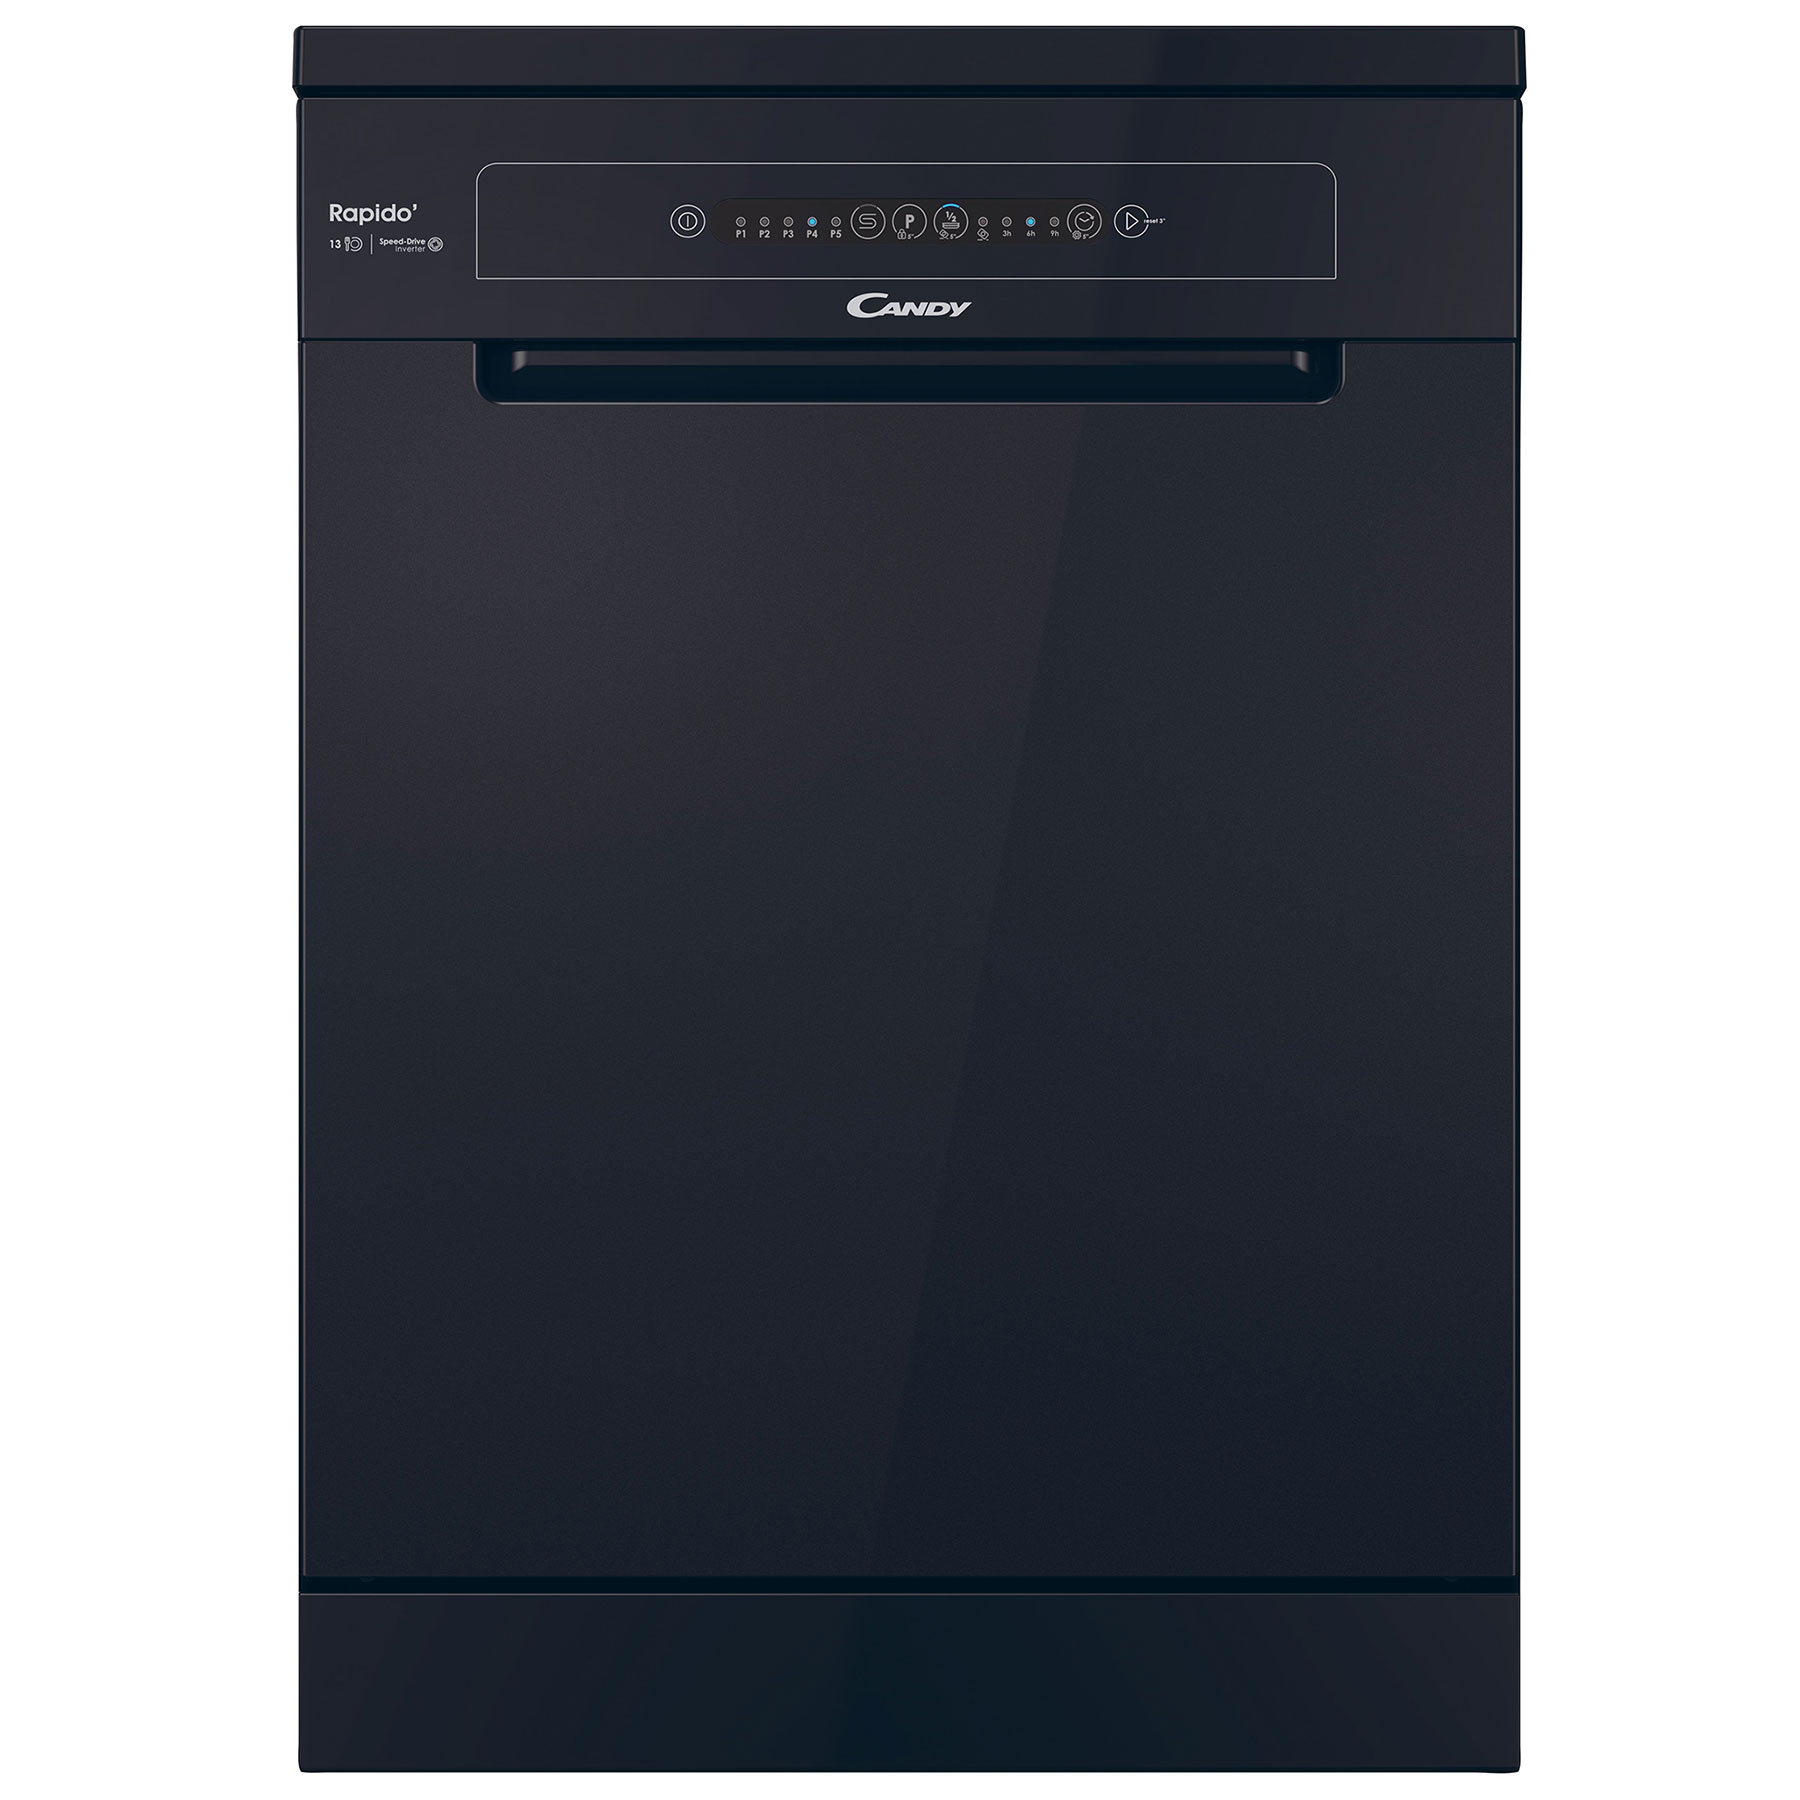 Image of Candy CF3C9E0B 60cm Dishwasher in Black 13 Place Setting C Rated